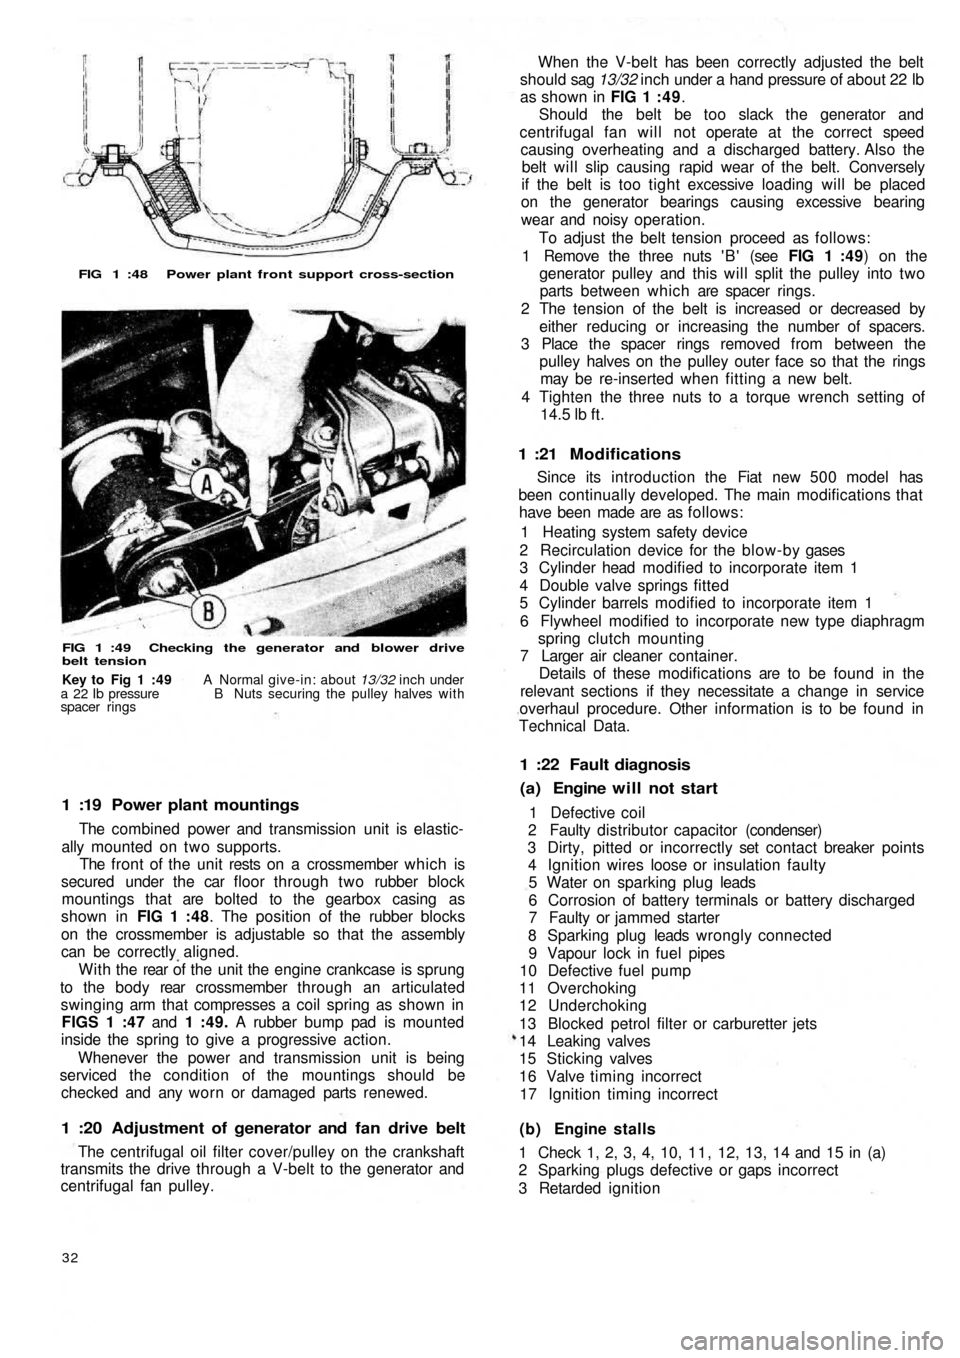 FIAT 500 1969 1.G Owners Manual FIG 1 :48  Power plant front support cross-section
FIG 1 :49  Checking  the generator and  blower drive
belt tension
1 :19  Power plant mountings
The combined power and transmission unit is elastic-
a